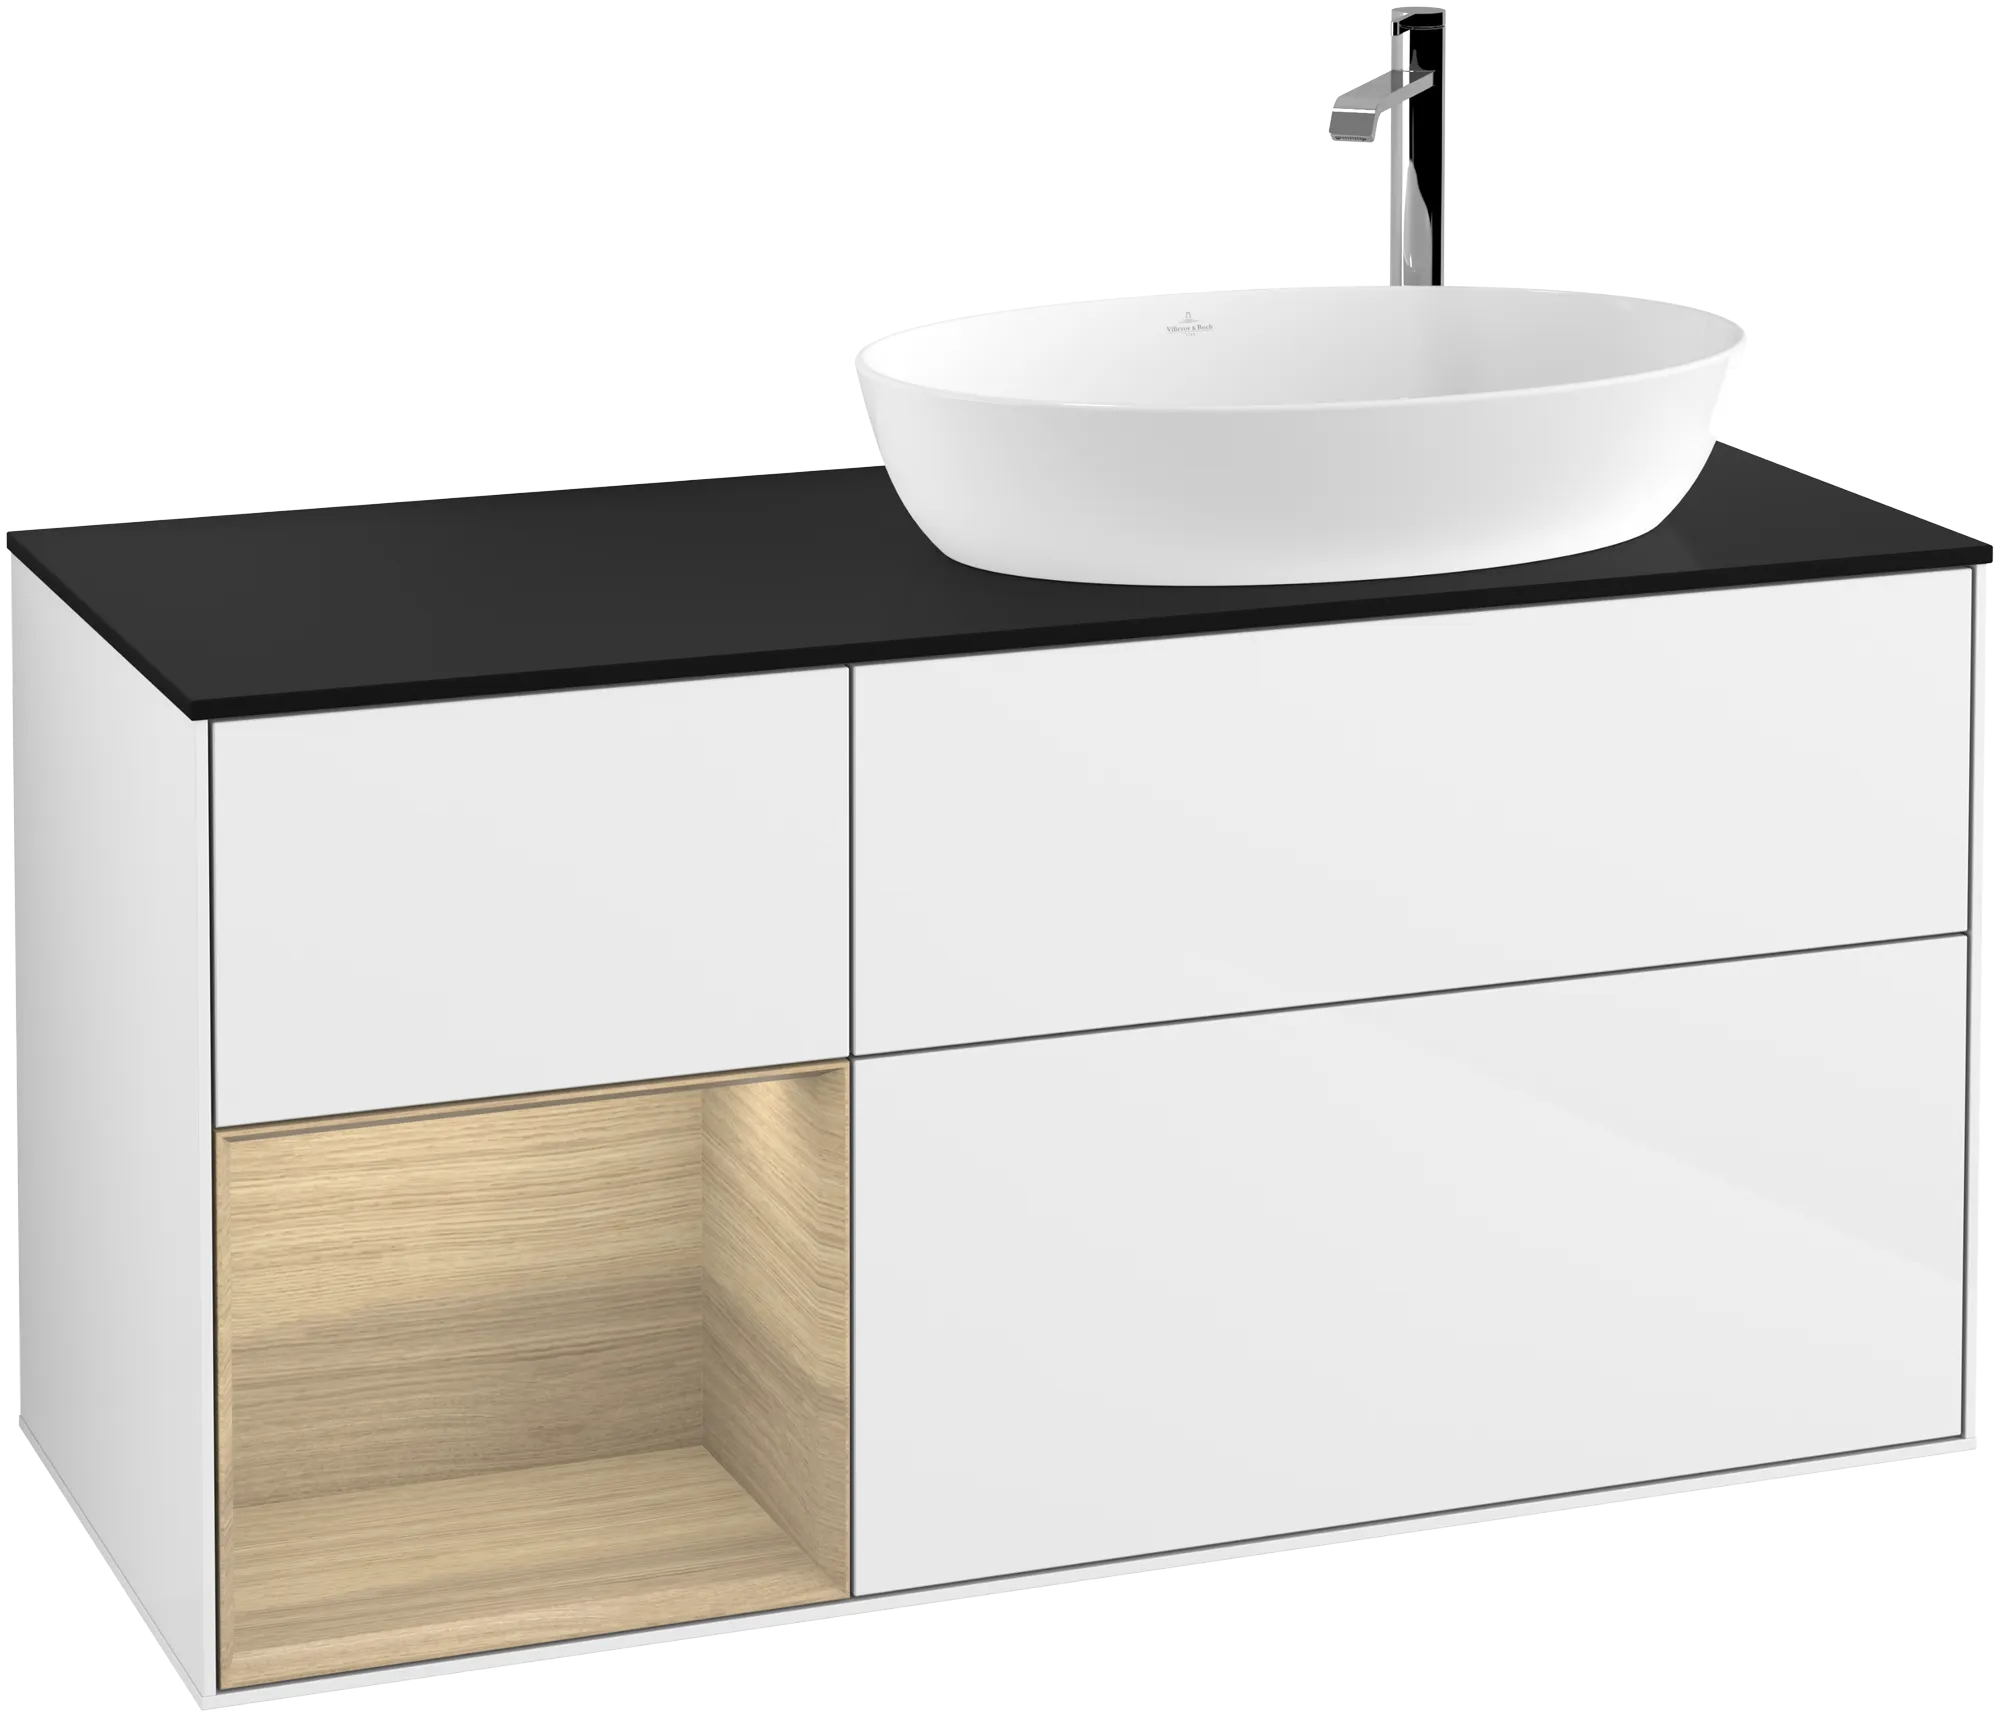 VILLEROY BOCH Finion Vanity unit, with lighting, 3 pull-out compartments, 1200 x 603 x 501 mm, Glossy White Lacquer / Oak Veneer / Glass Black Matt #G922PCGF resmi